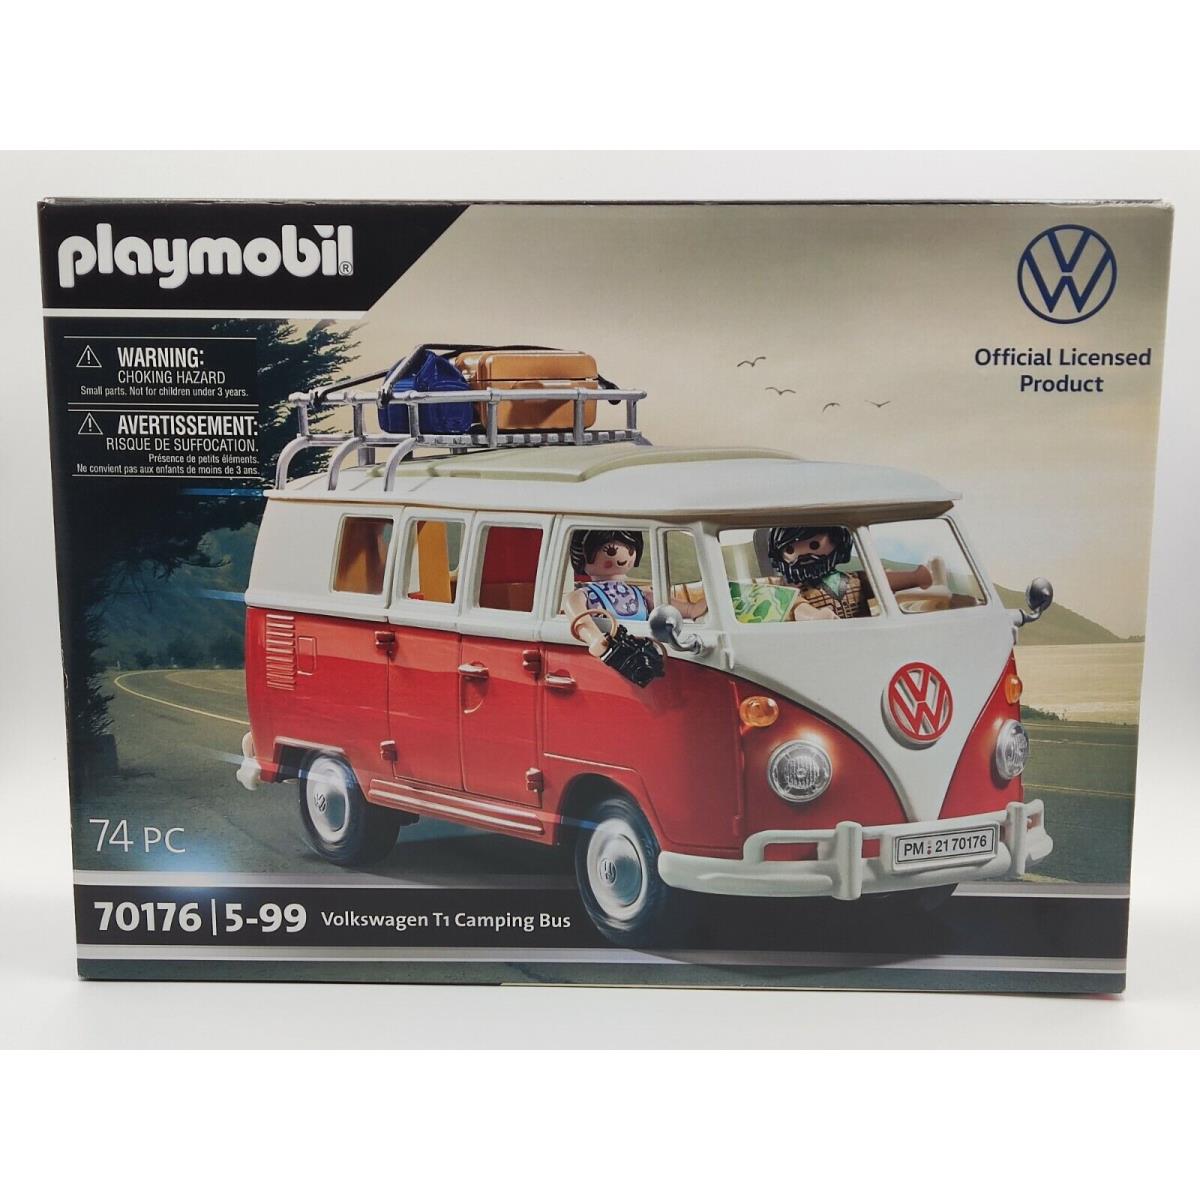 Playmobil 70176 Volkswagen T1 Camping Bus Camper Motorhome Toy Model VW Official